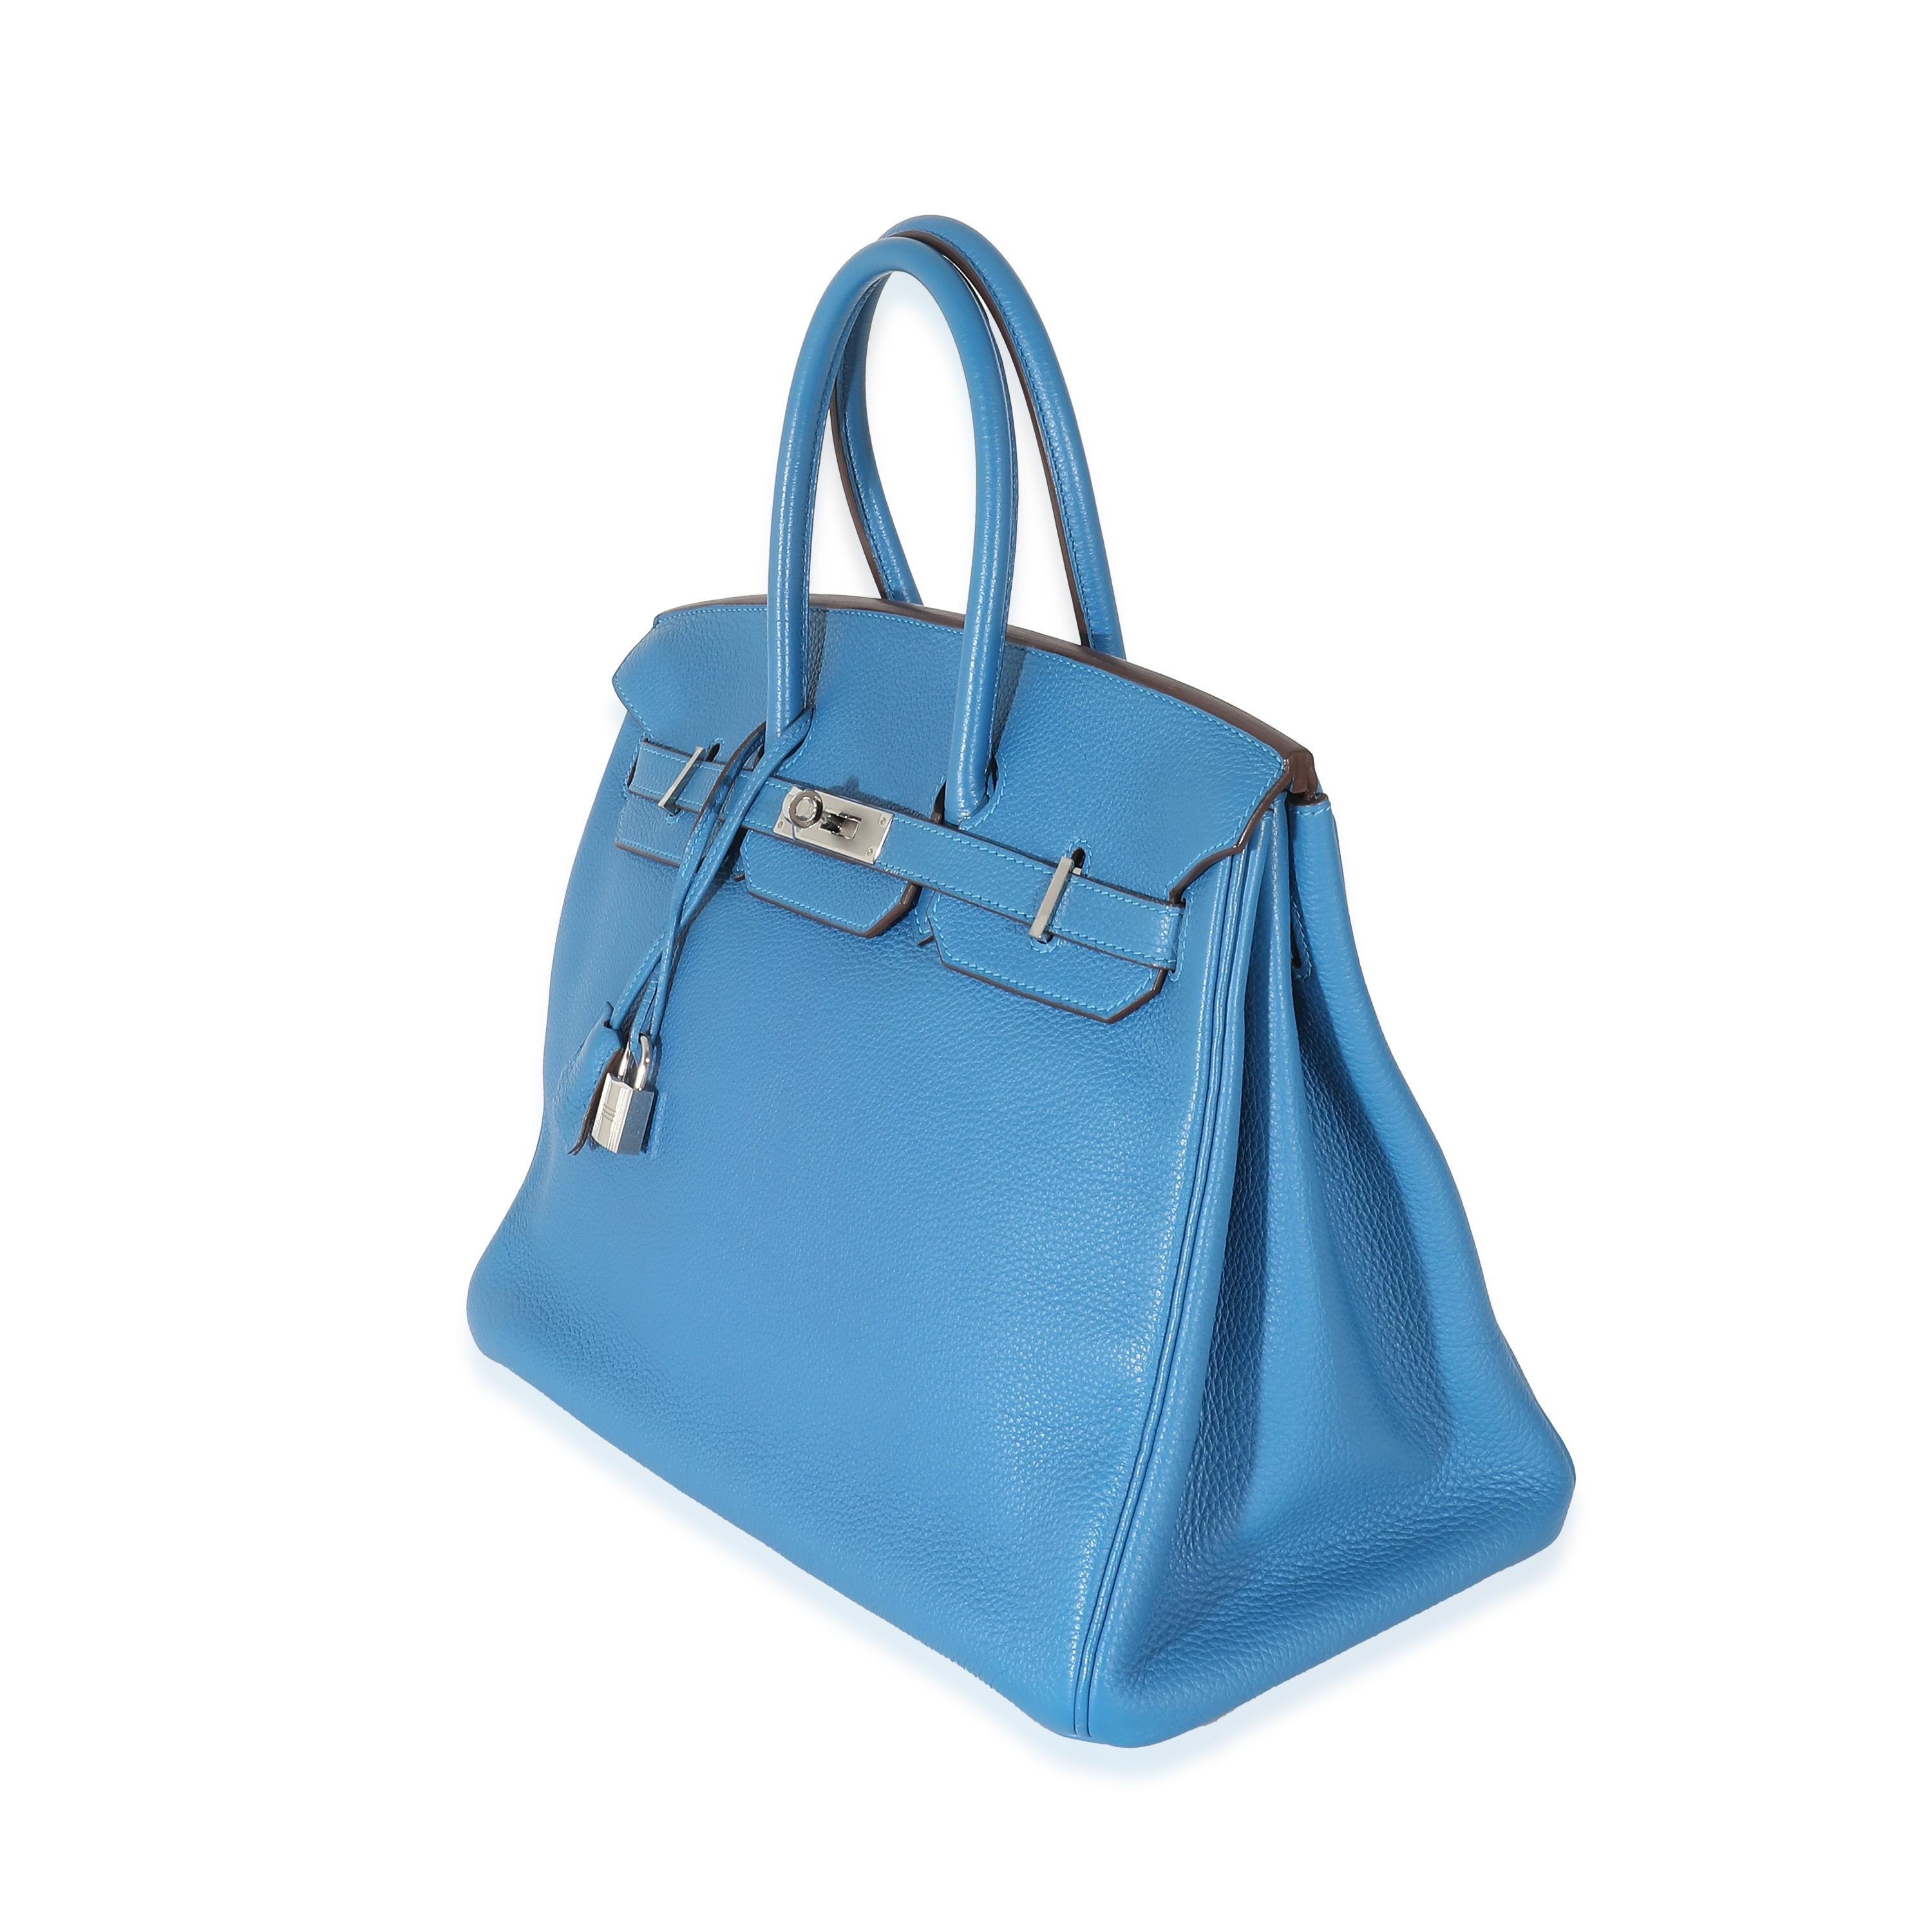 Hermes Mykonos Togo Birkin 35 PHW In Excellent Condition For Sale In New York, NY